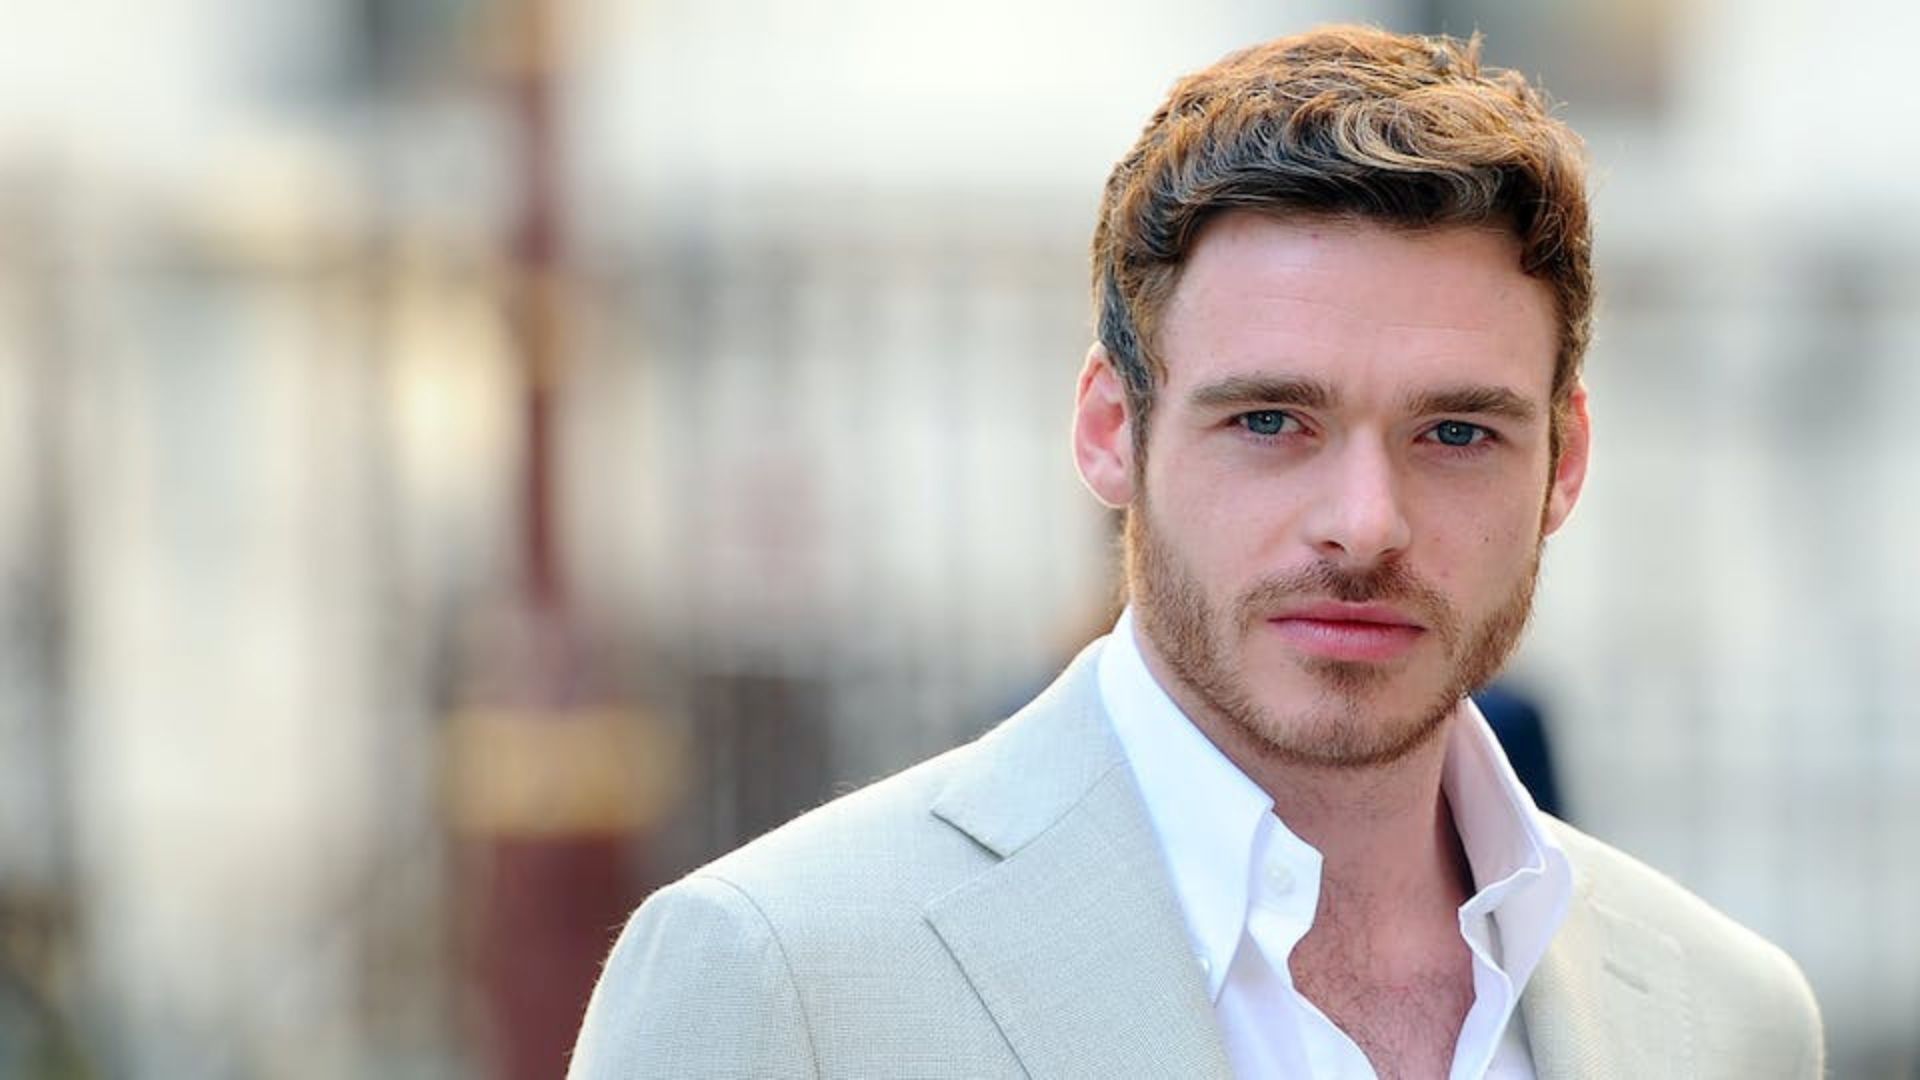 Richard Madden Wearing A White Suit